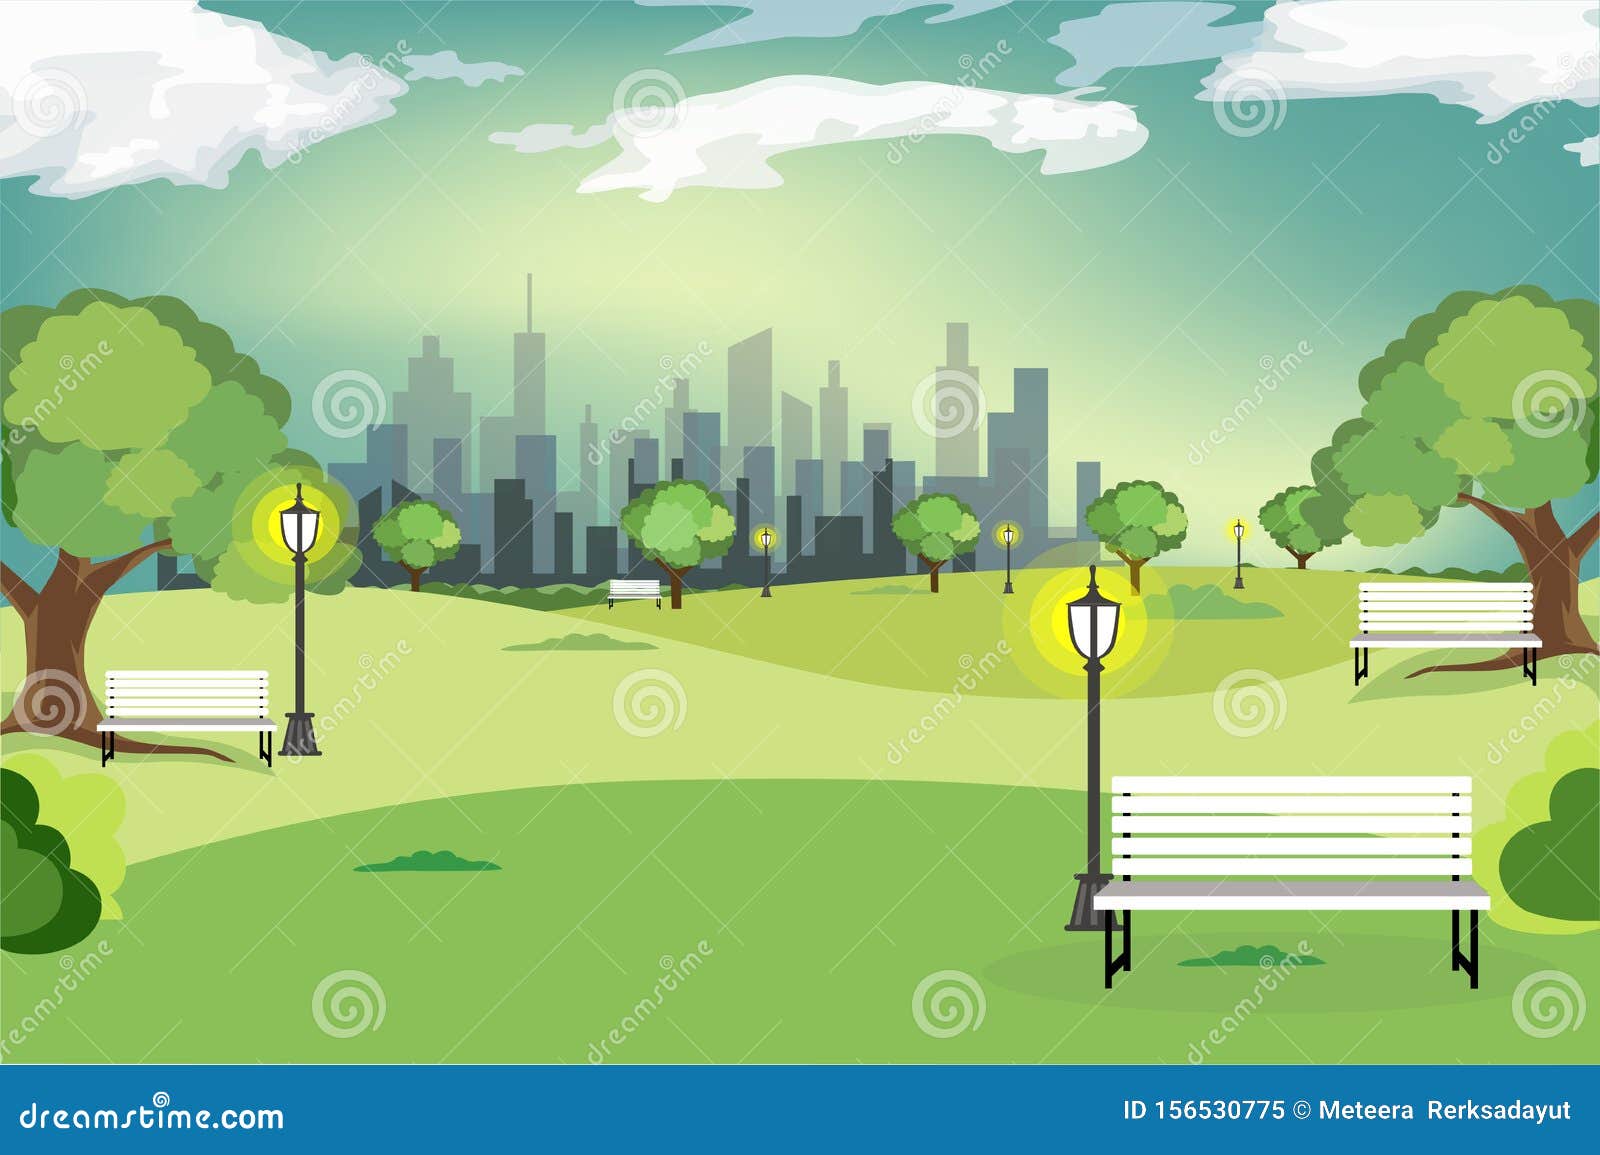 Relaxing time in city park stock illustration. Illustration of ...